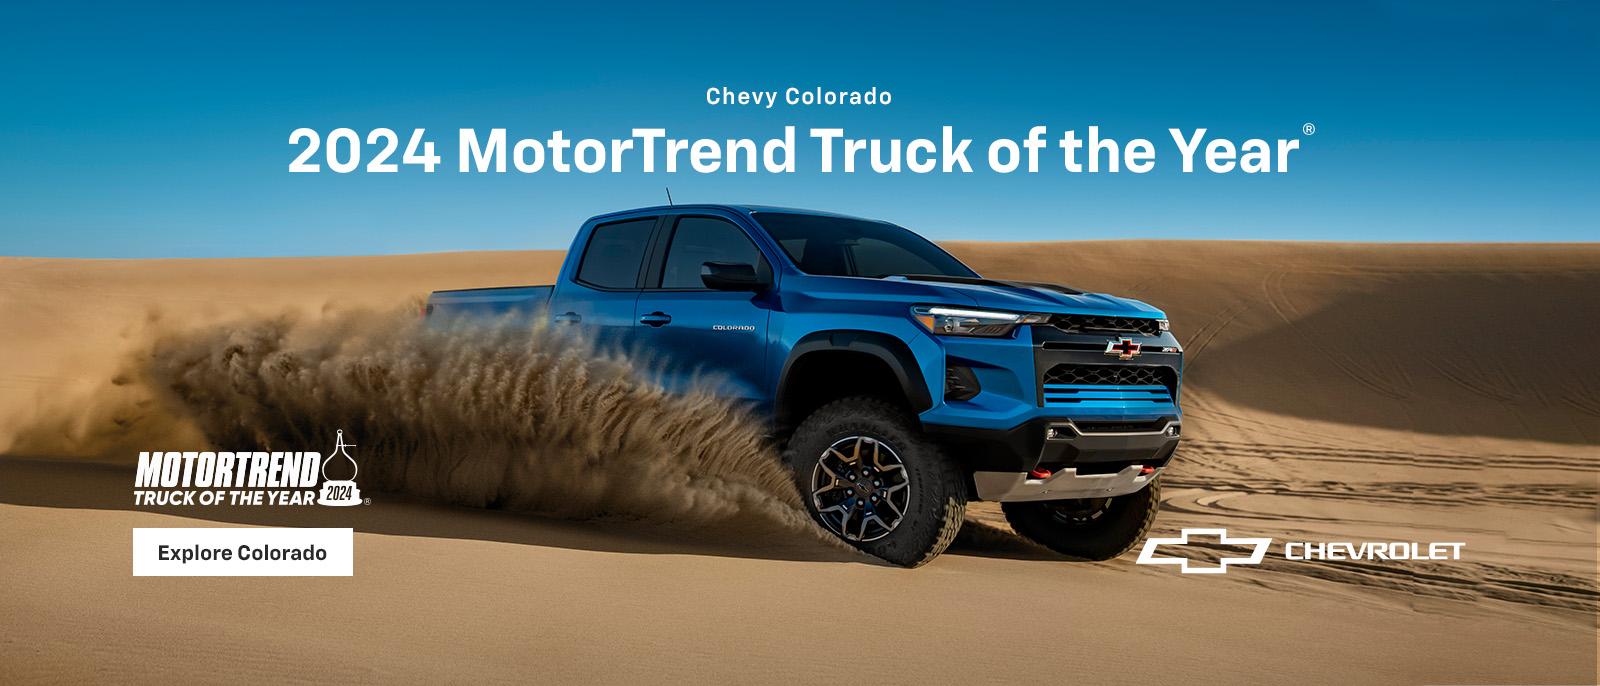 Colorado. 2024 MotorTrend Truck of the Year